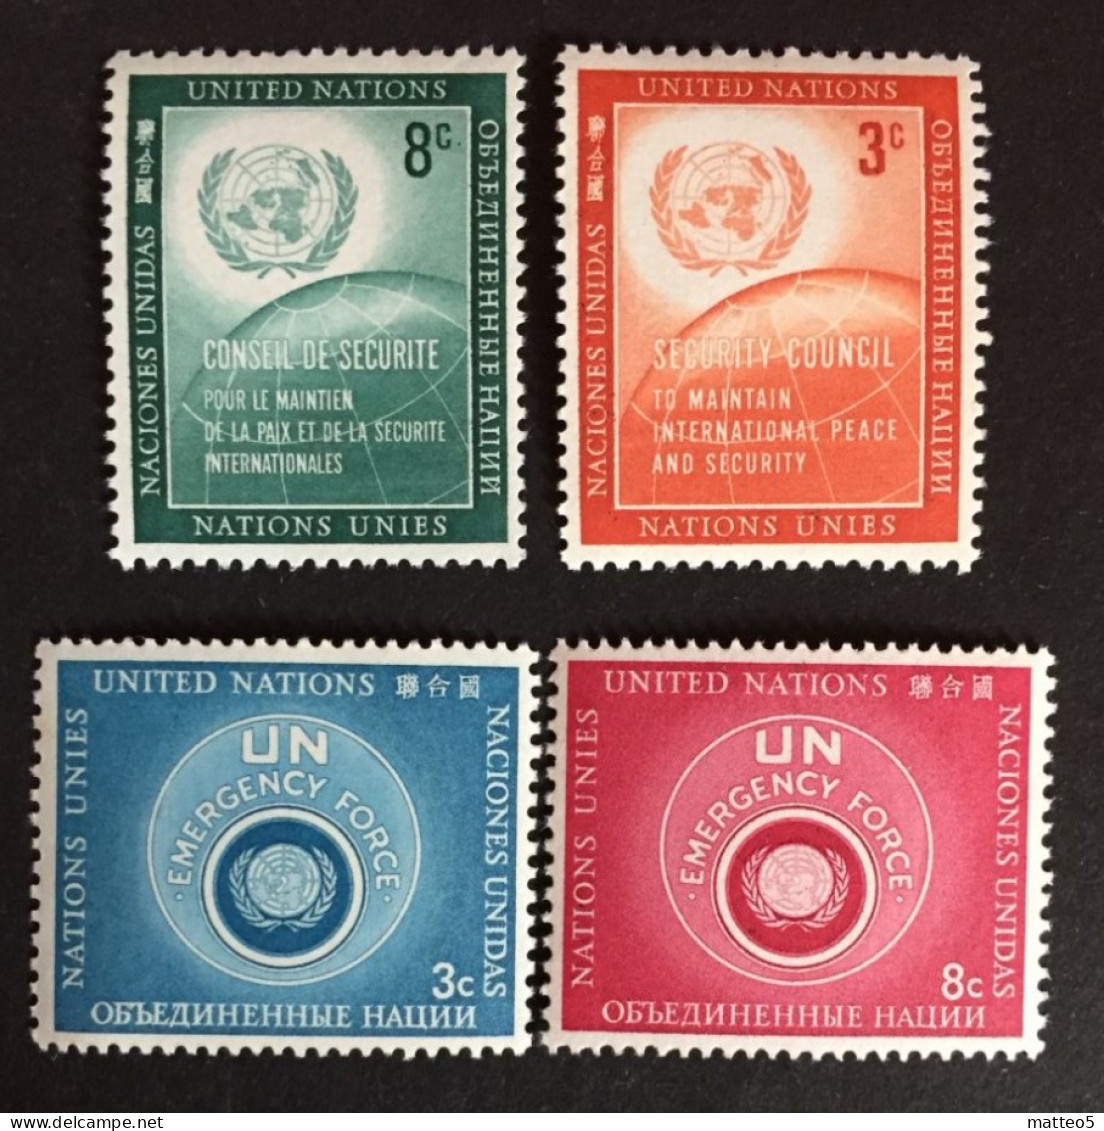 1957 - United Nations UNO UN ONU - UN Emergency Force And Security Council - Unused - Neufs